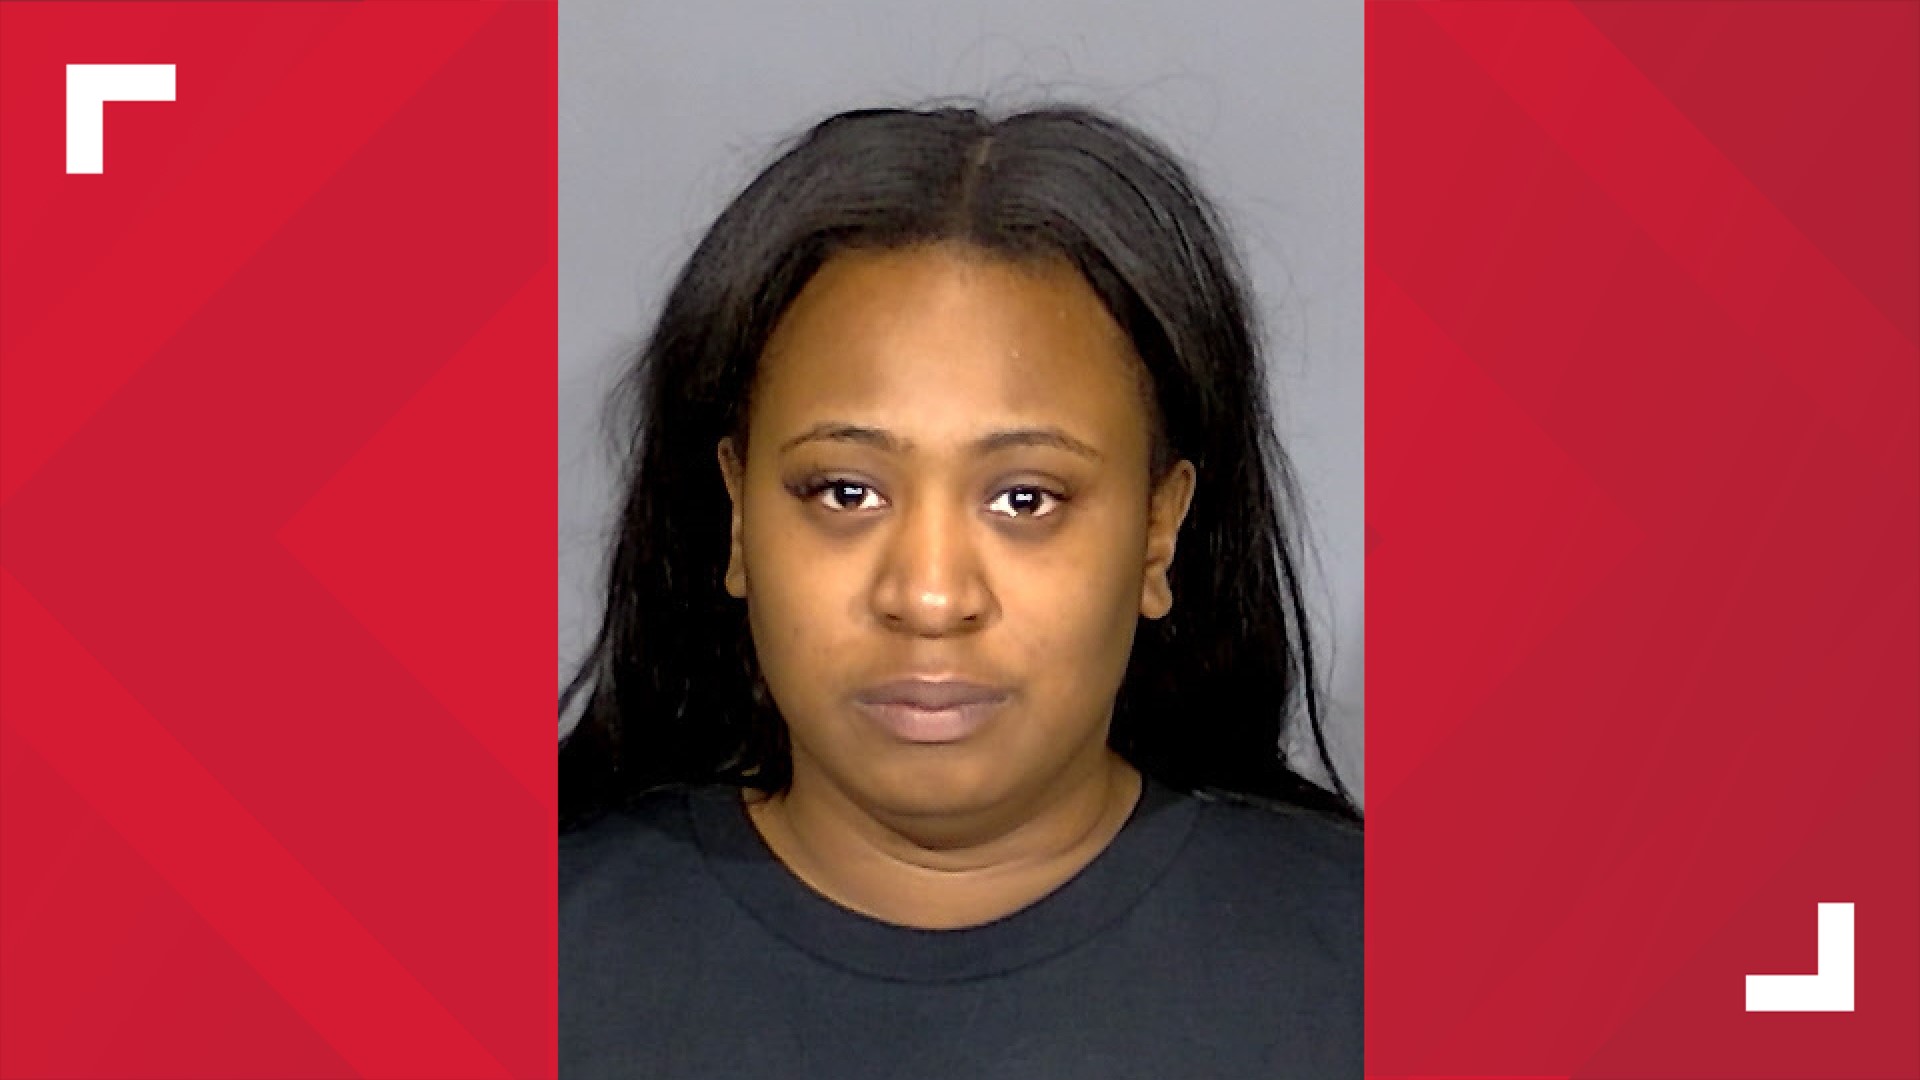 Gaylyn Morris, 26, is accused of murder in the killing of 26-year-old Andre Smith.